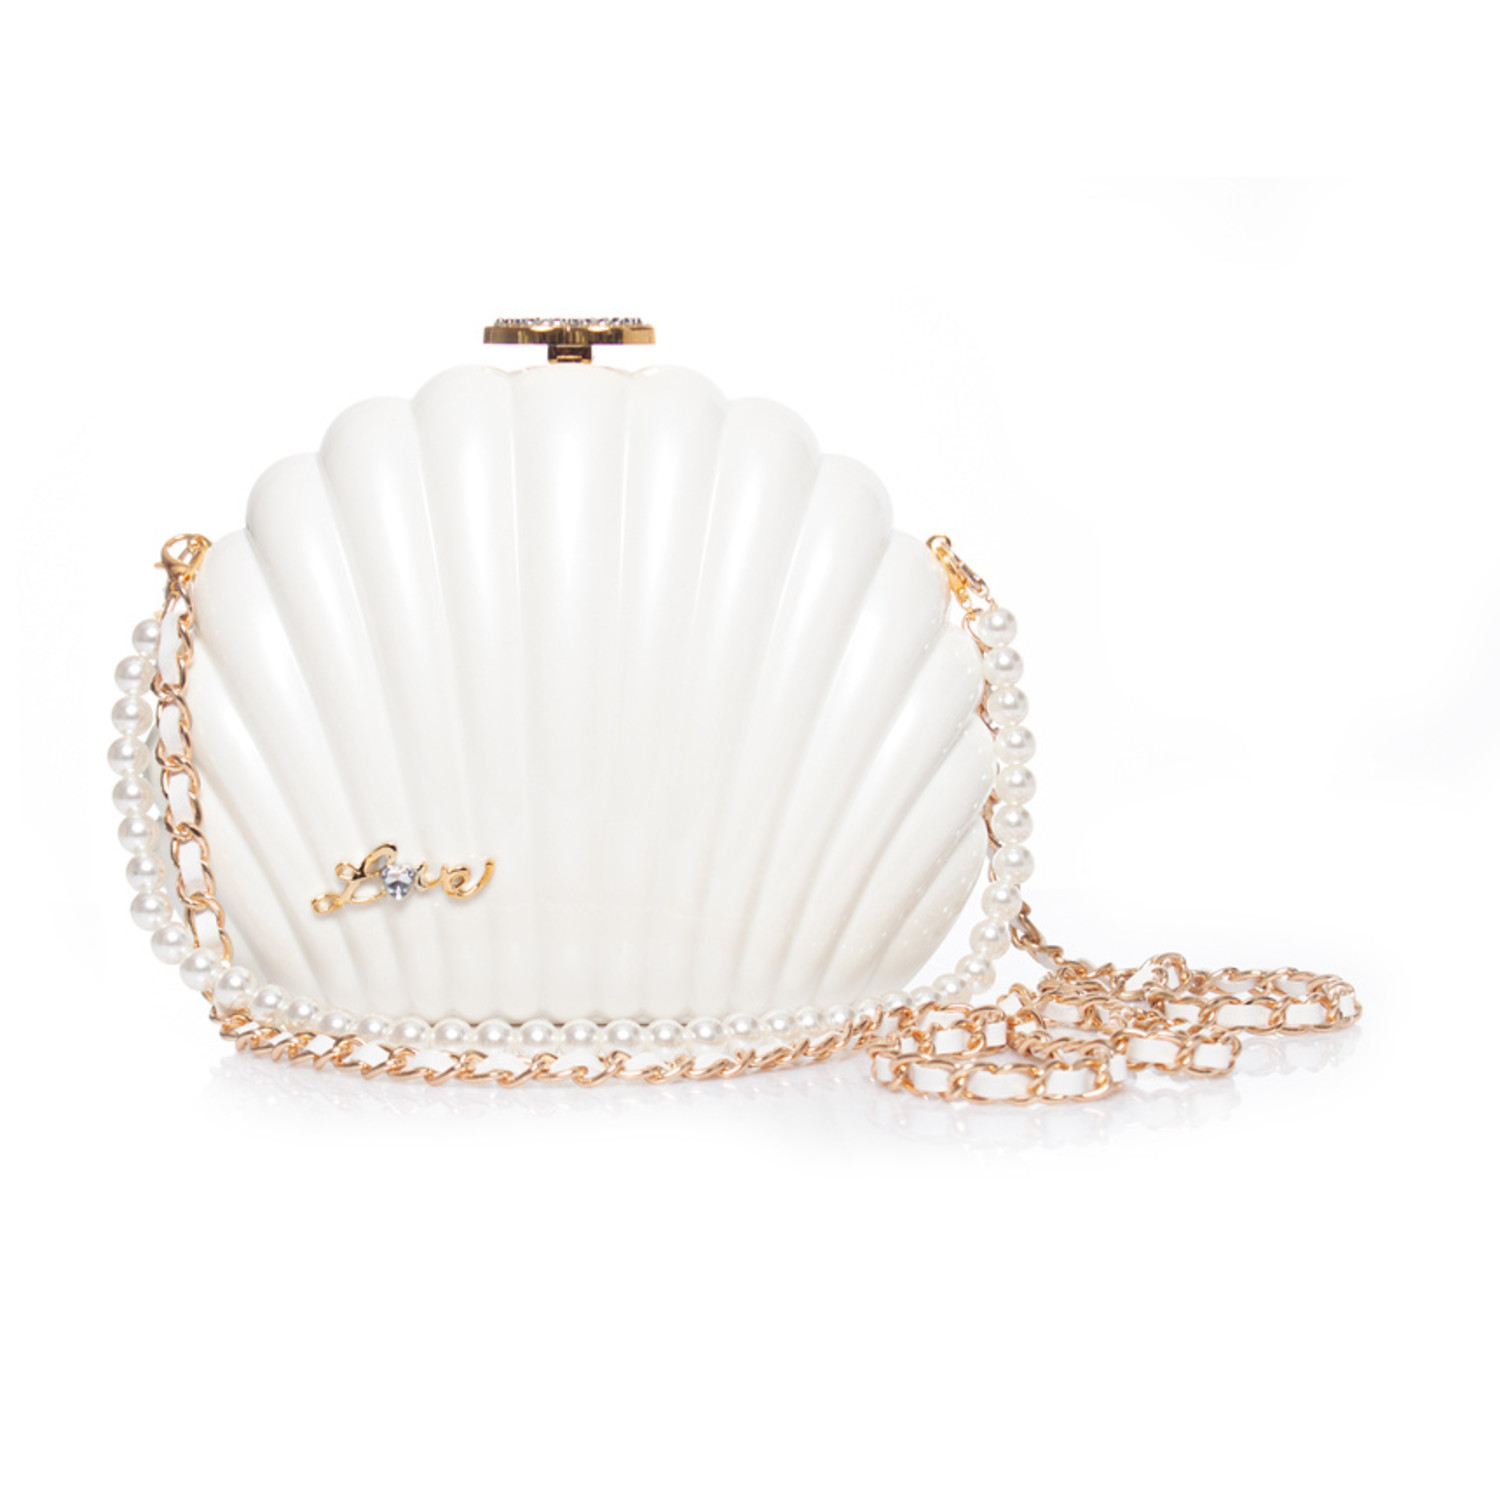 Chanel Minaudière, The Ultimate Show-Stopping Evening Bag